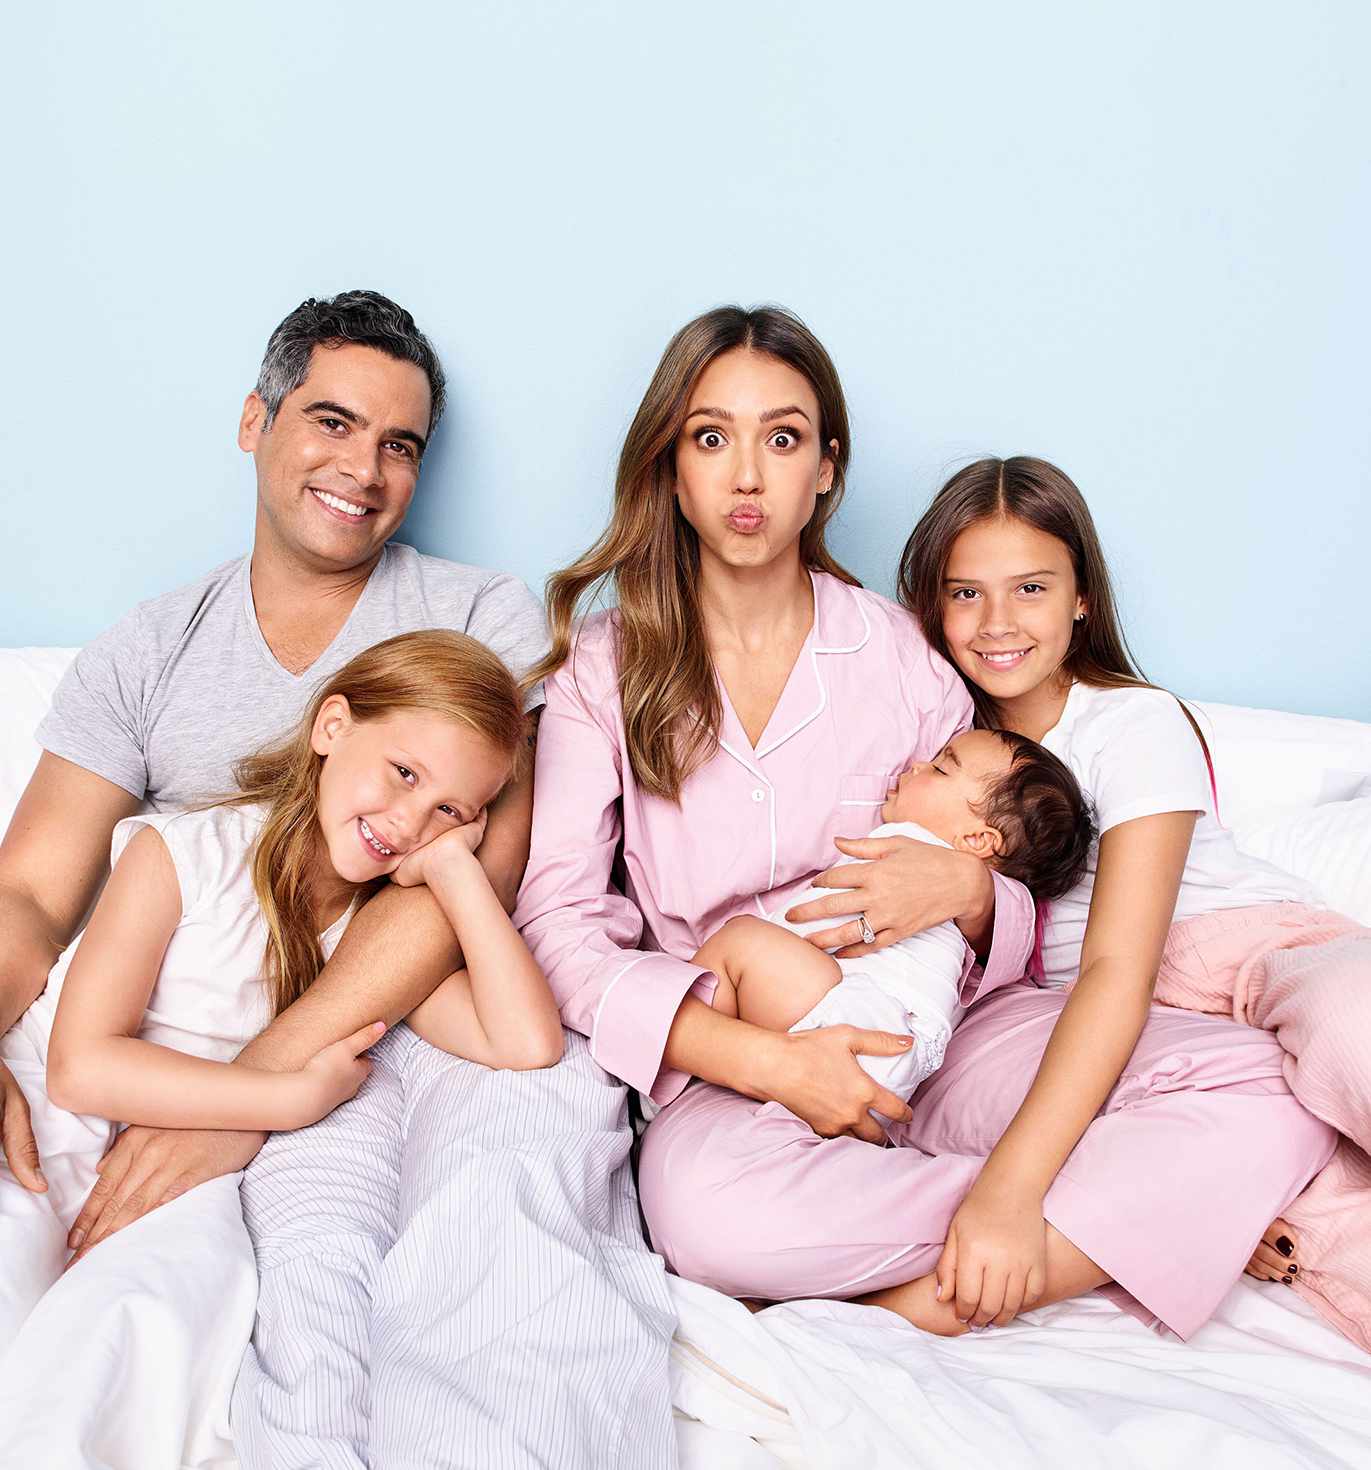 Jessica Alba S Favorite Family Traditions Parents She has been married to. favorite family traditions